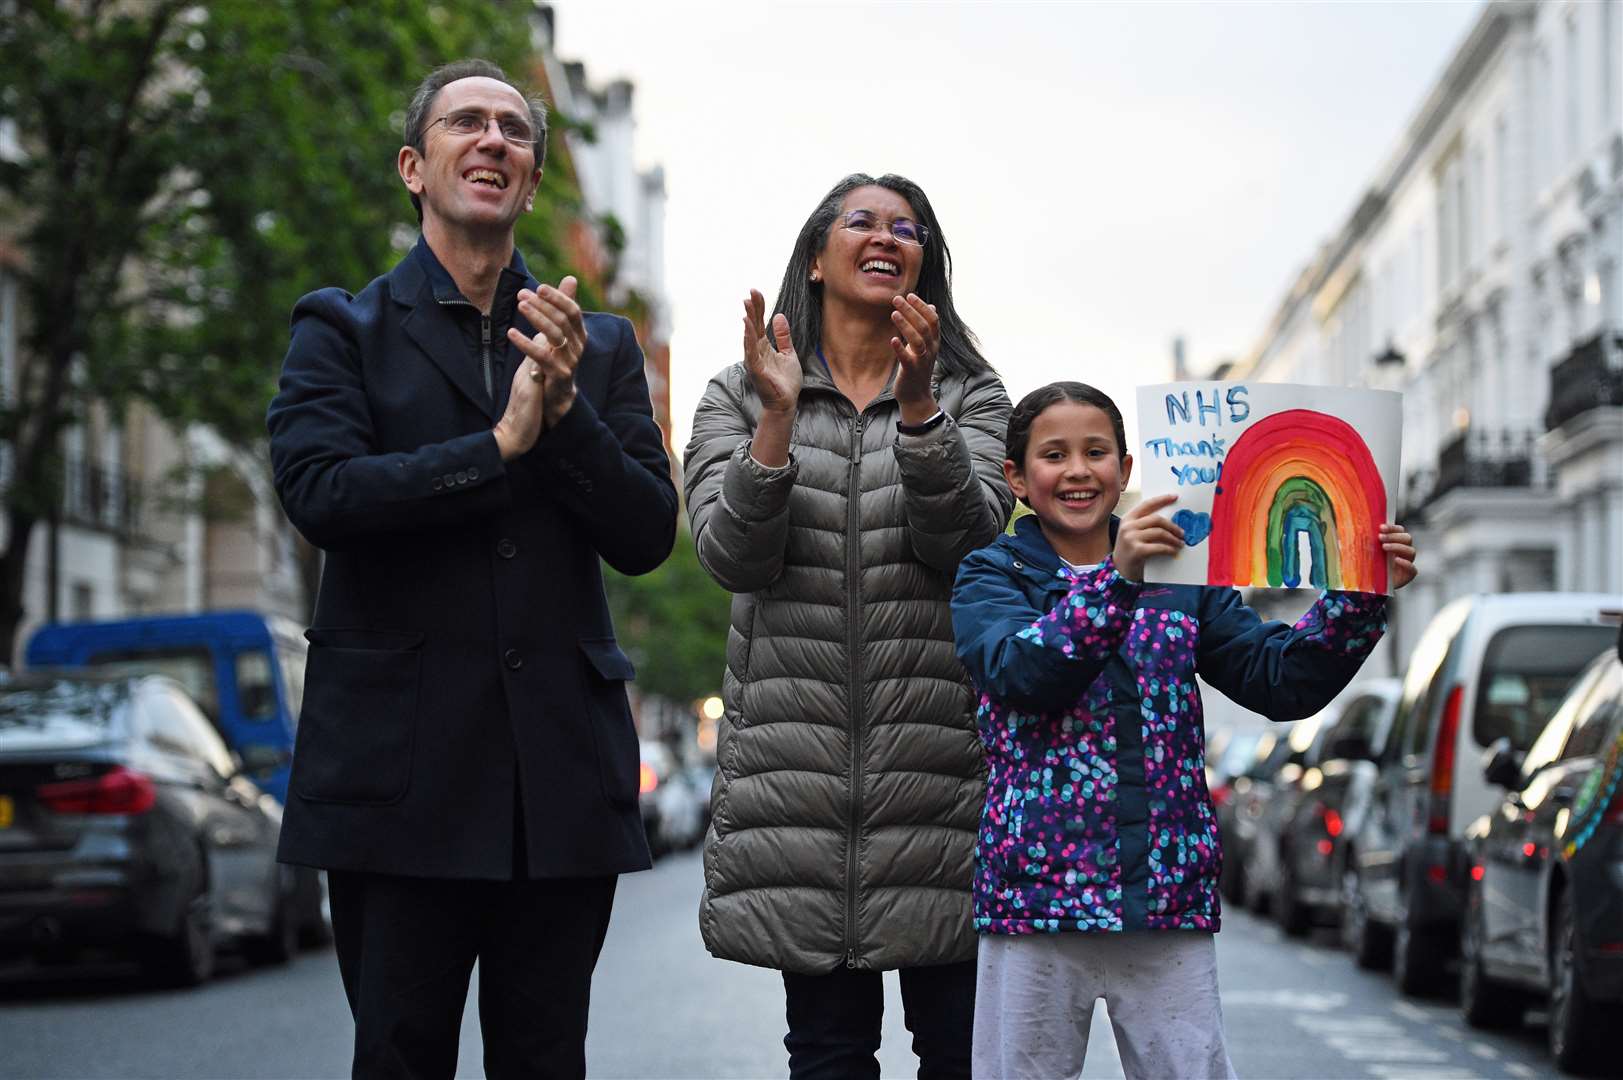 Rainbows were on show as the public showed their appreciation (Kirsty O’Connor/PA)